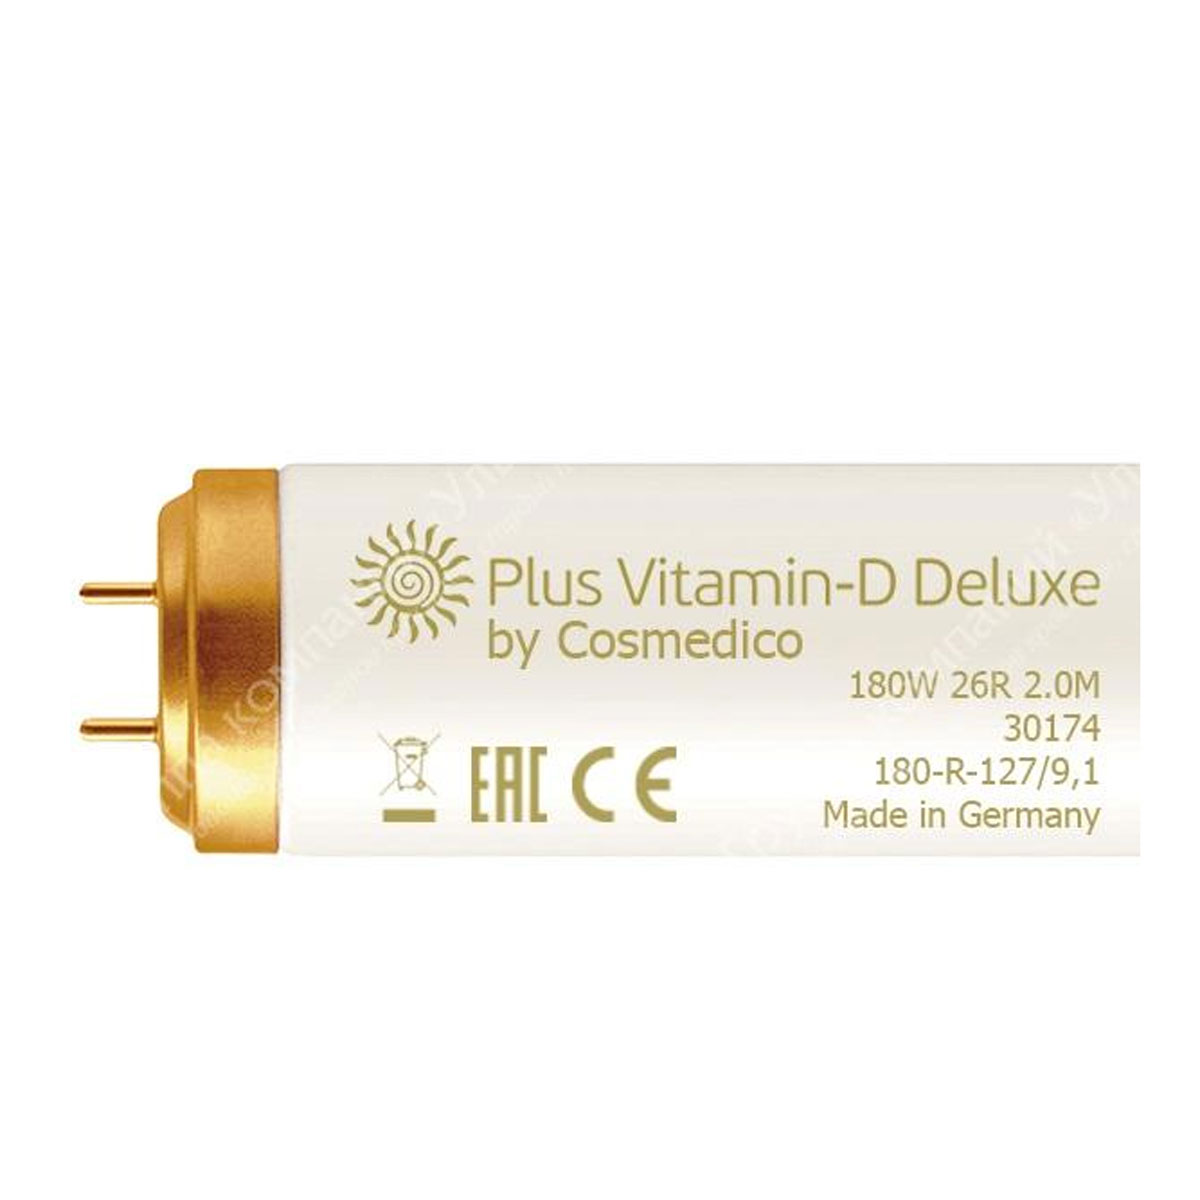 Plus Vitamin-D Deluxe 33R 225W by Cosmedico